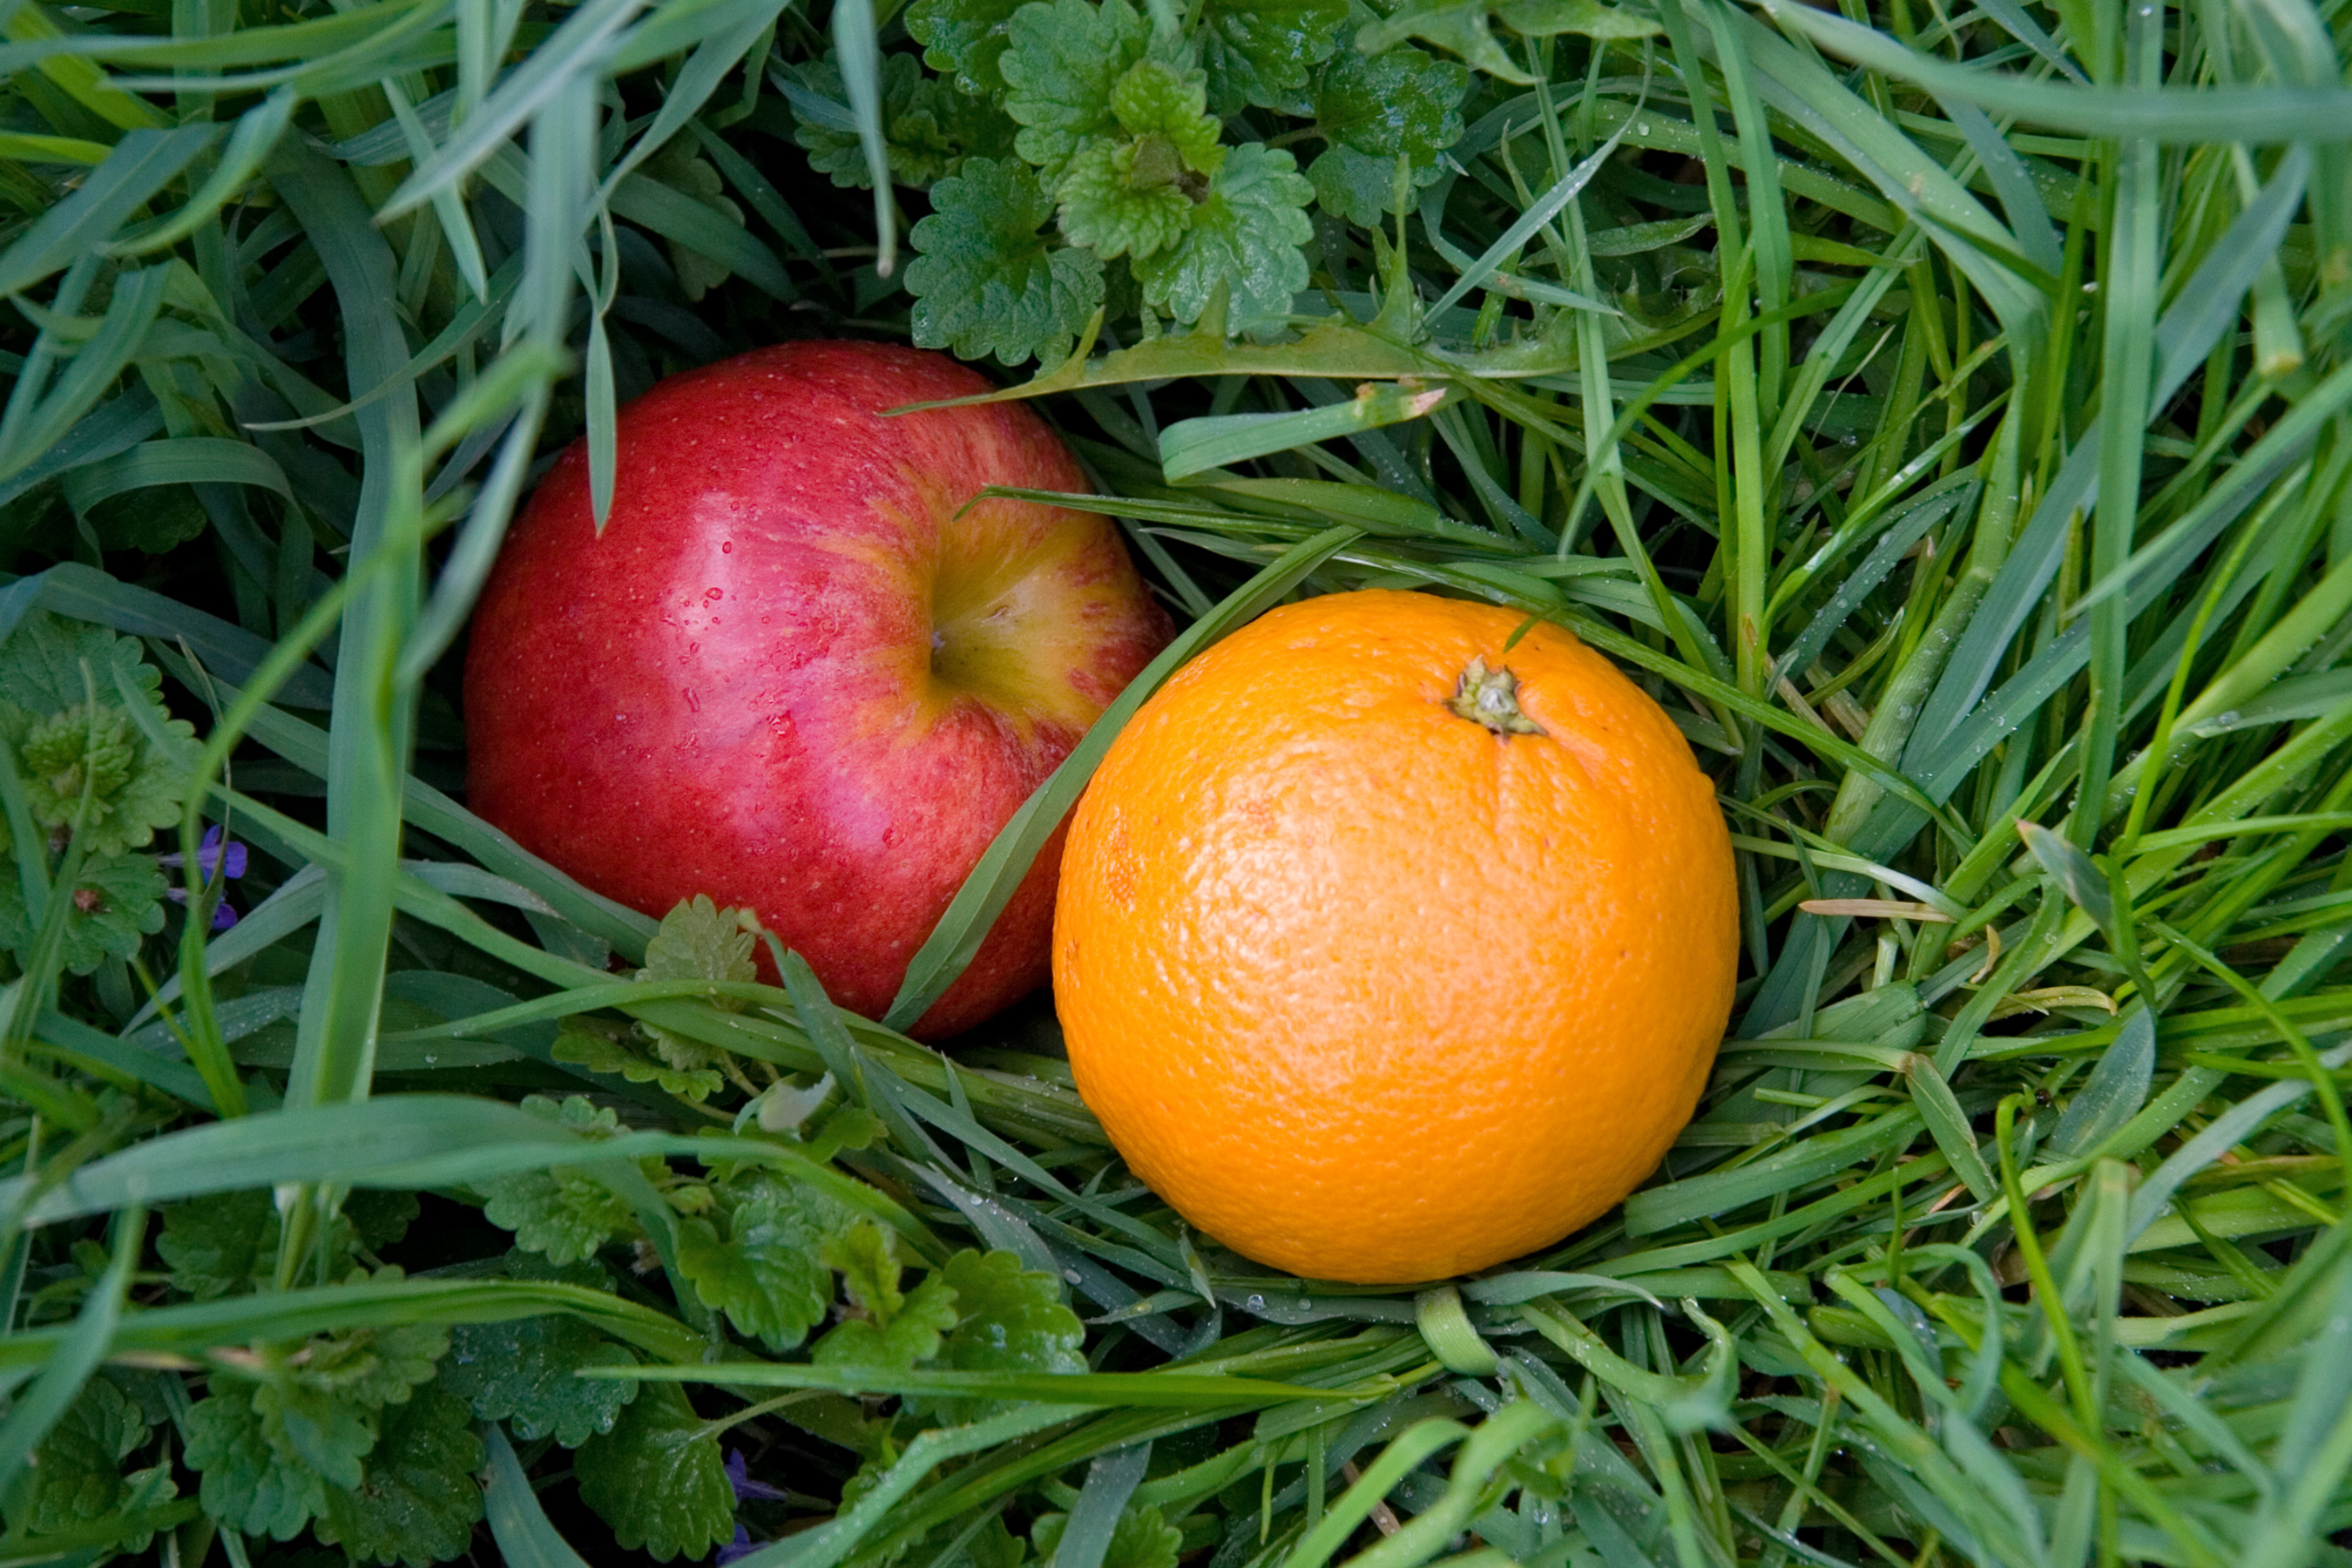 Apple and orange in the grass